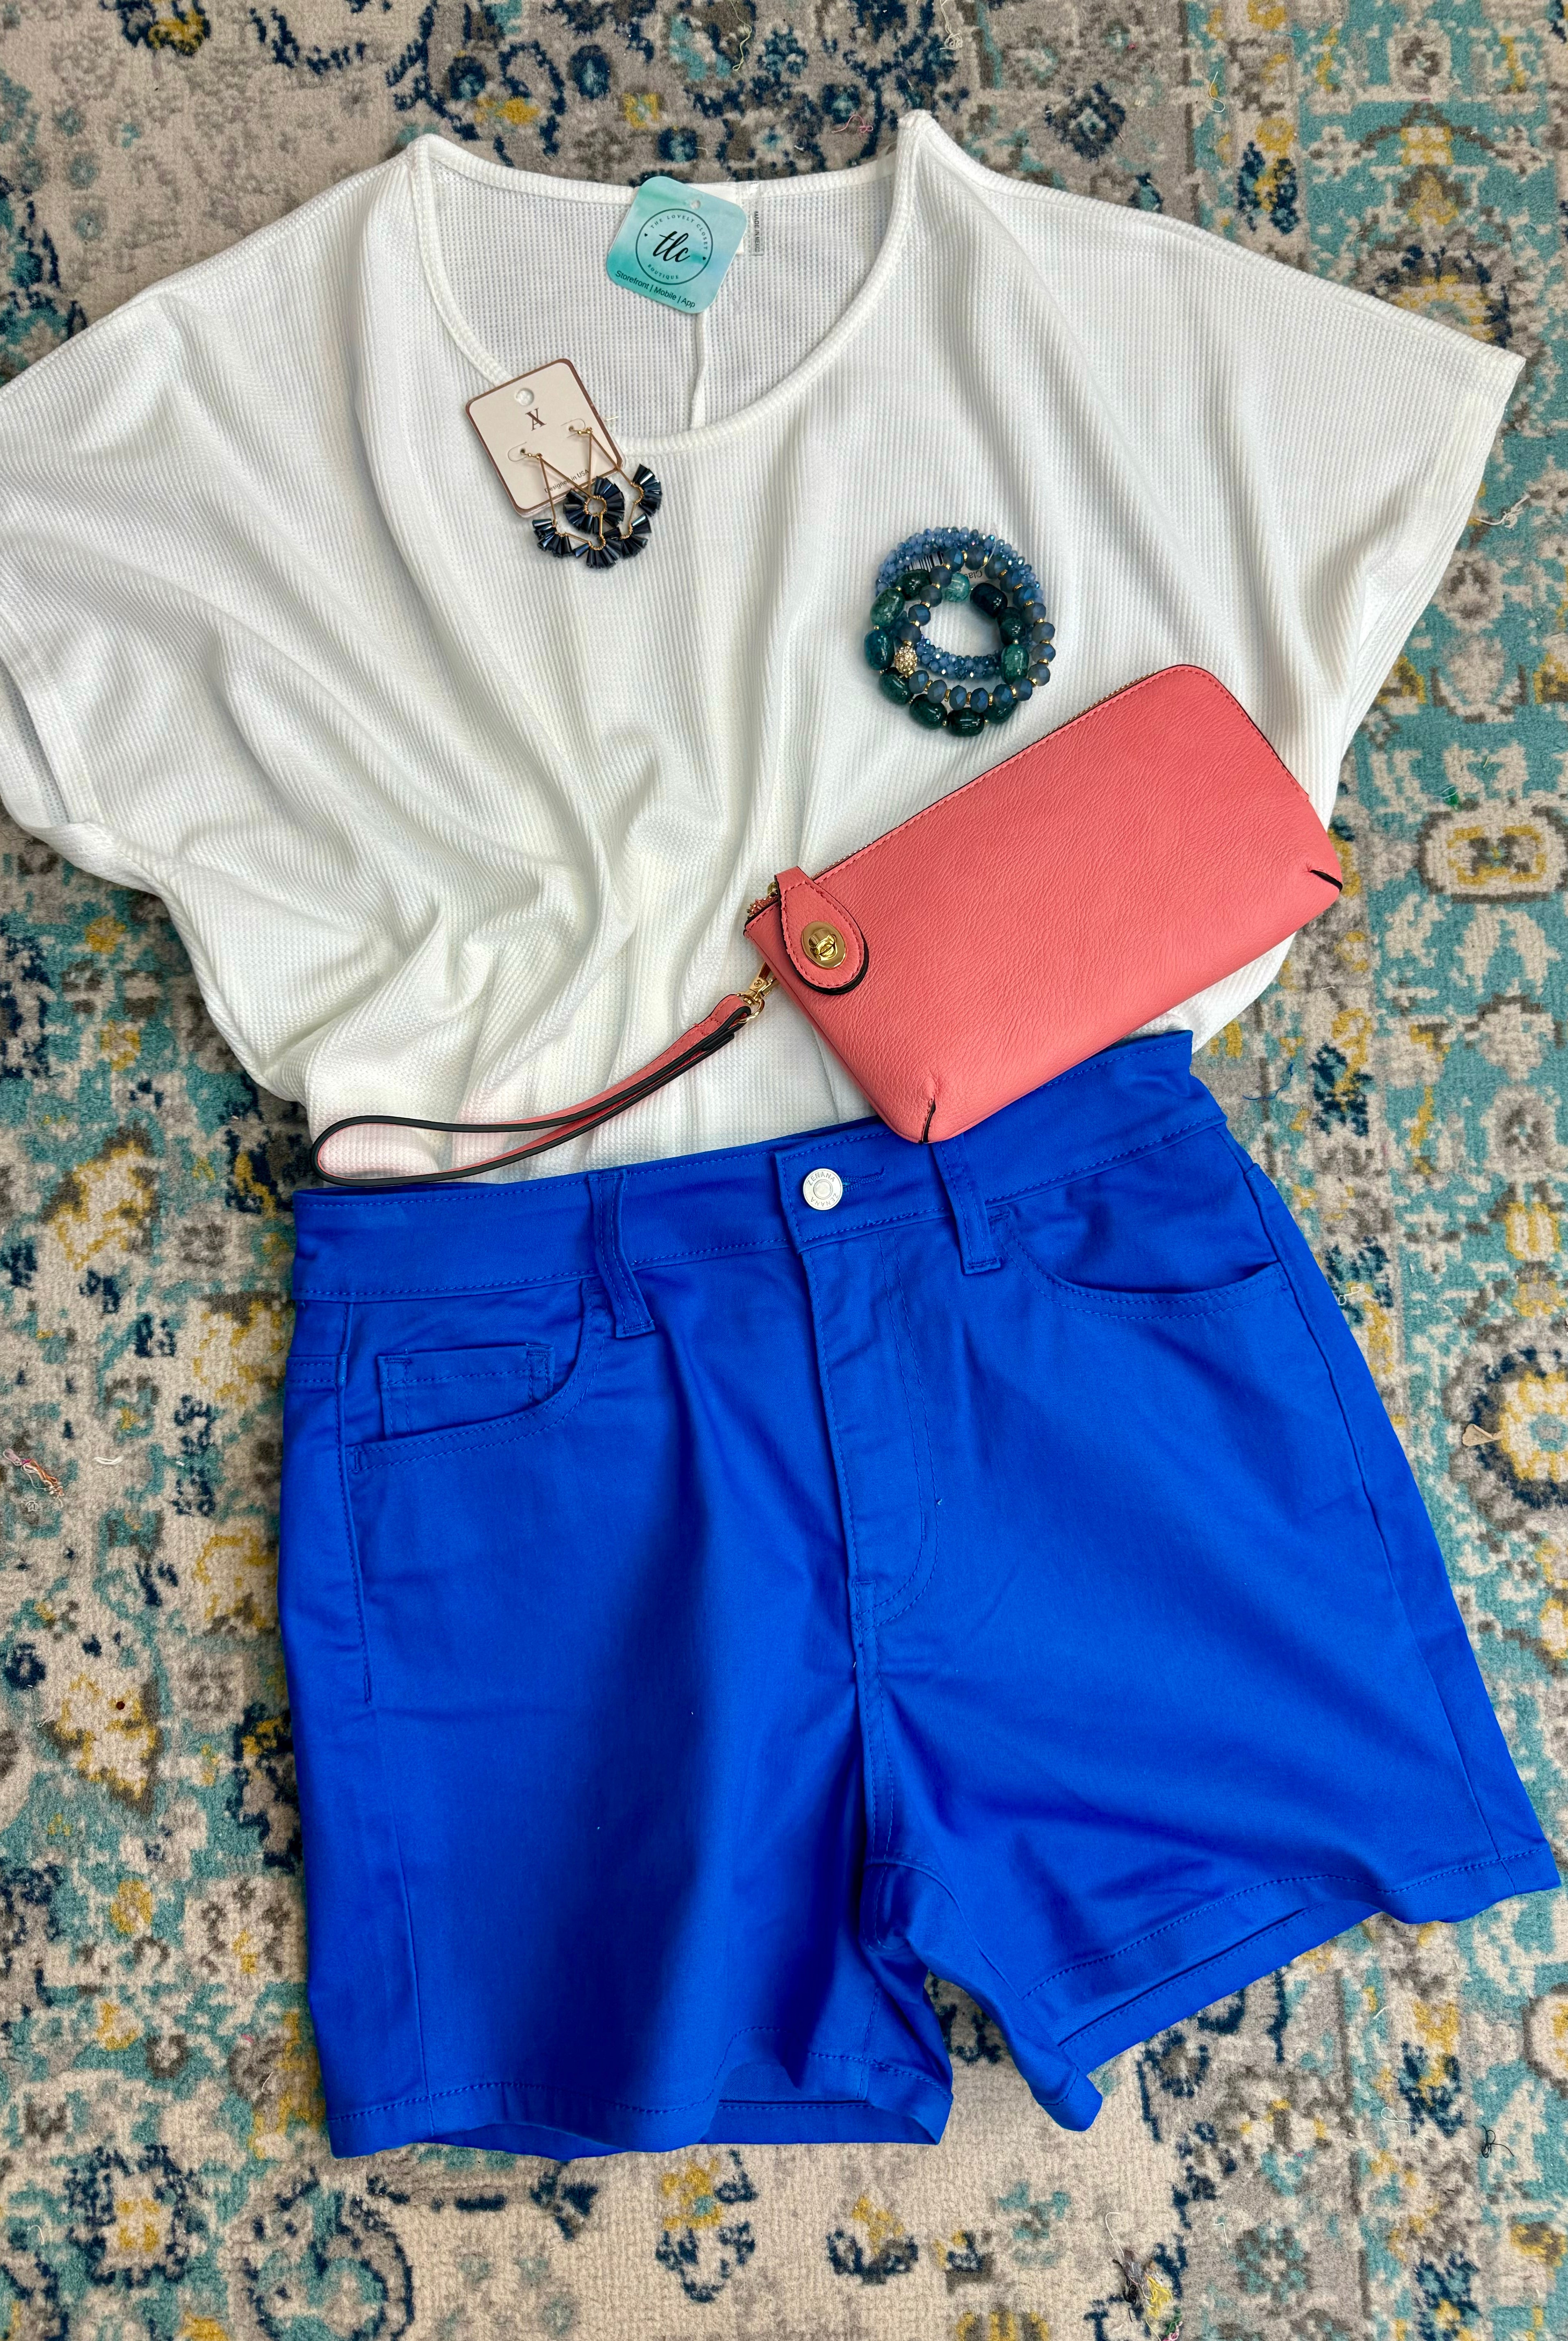 Ocean Blue Shorts-230 Skirts/Shorts-The Lovely Closet-The Lovely Closet, Women's Fashion Boutique in Alexandria, KY